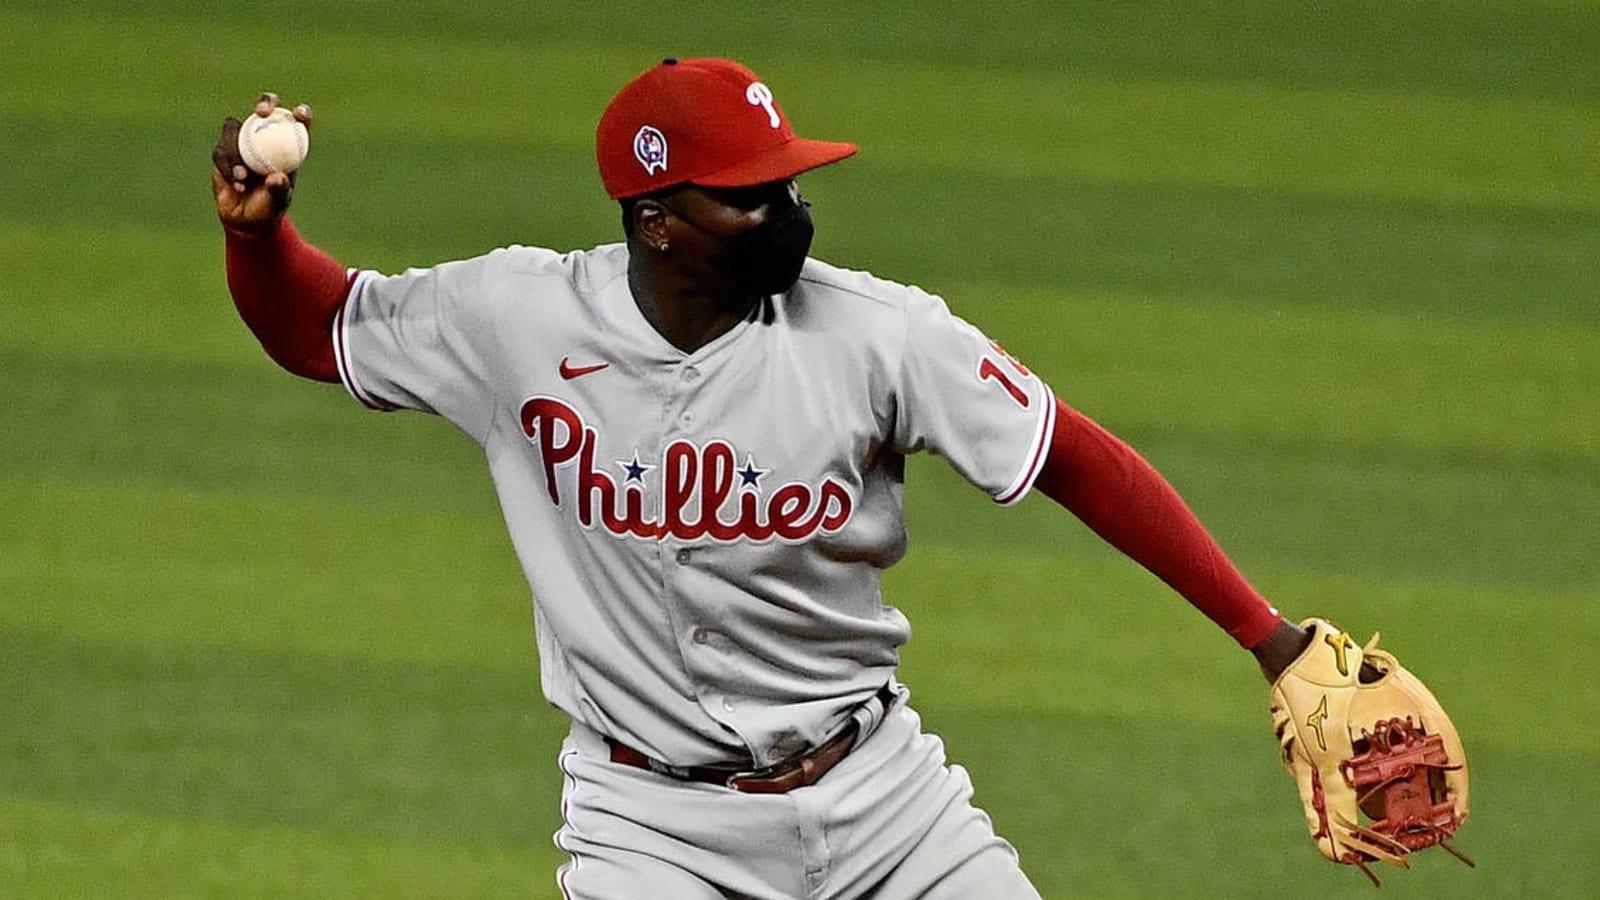 Report: Gregorius, Phillies agree to two-year, $28M deal